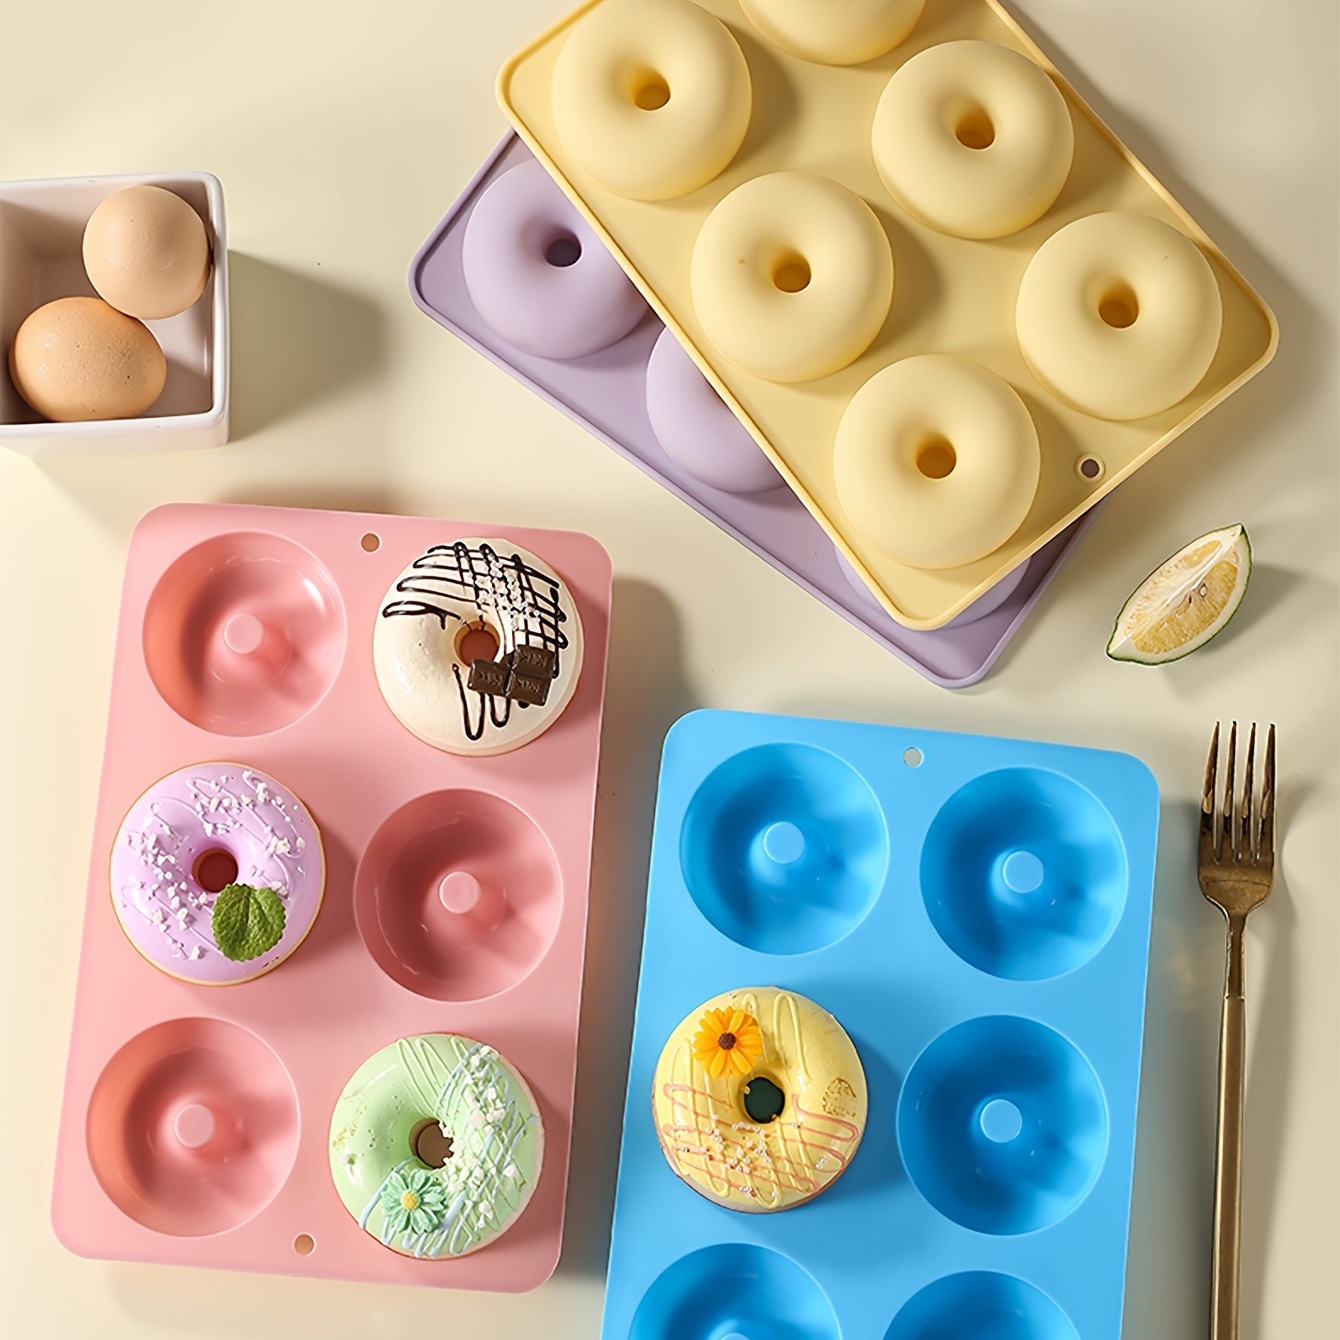 Walfos Silicone Donut Mold - Non-Stick Silicone Doughnut Pan Set, Just Pop  Out! Heat Resistant, Make Perfect Donut Cake Biscuit Bagels, BPA FREE and